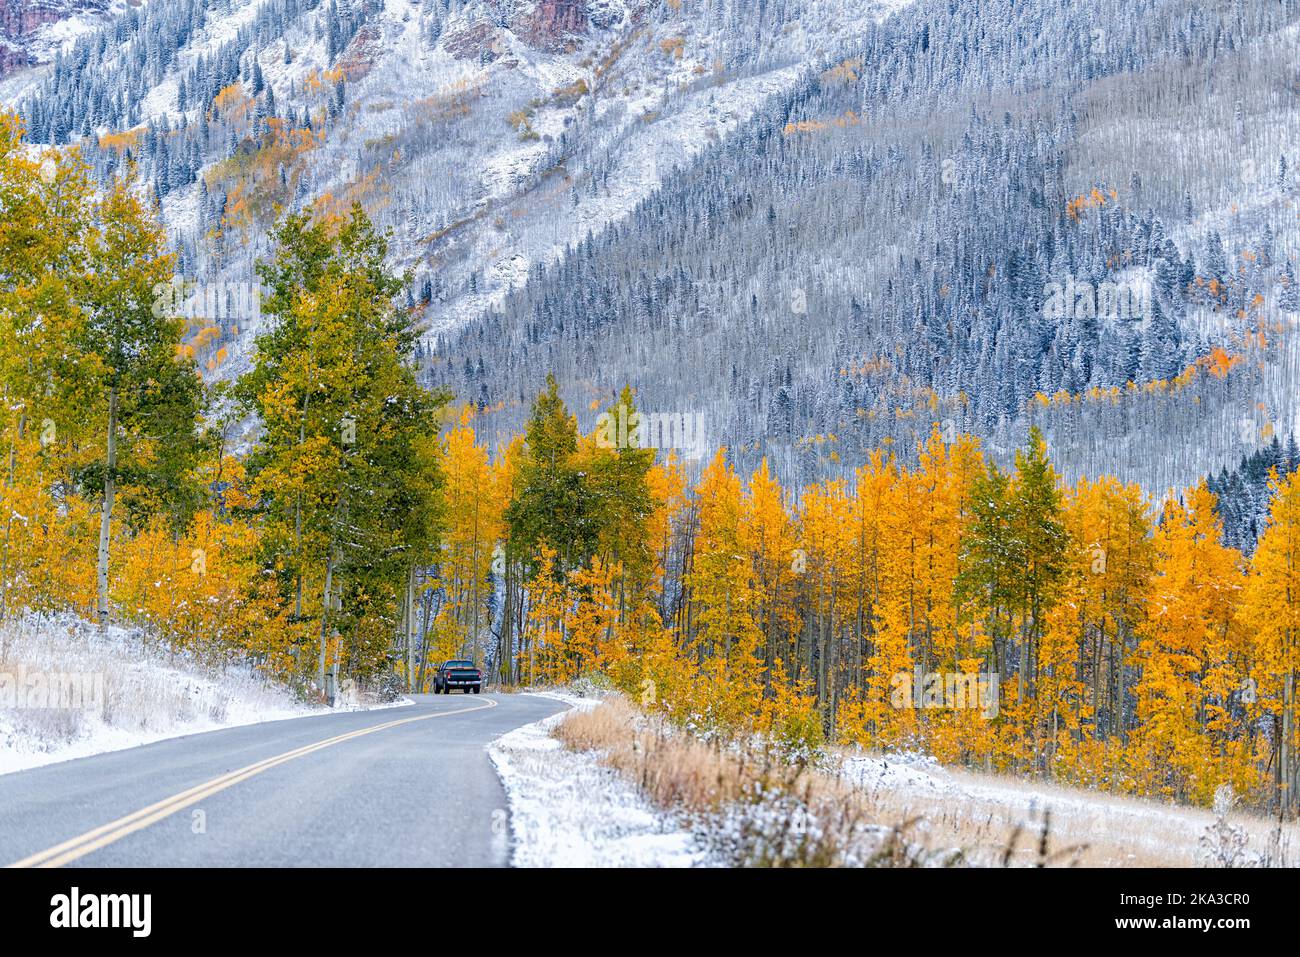 Forest yellow green trees covered in snow in Aspen, Colorado of Maroon bells mountains by vibrant foliage autumn along road with car driving Stock Photo